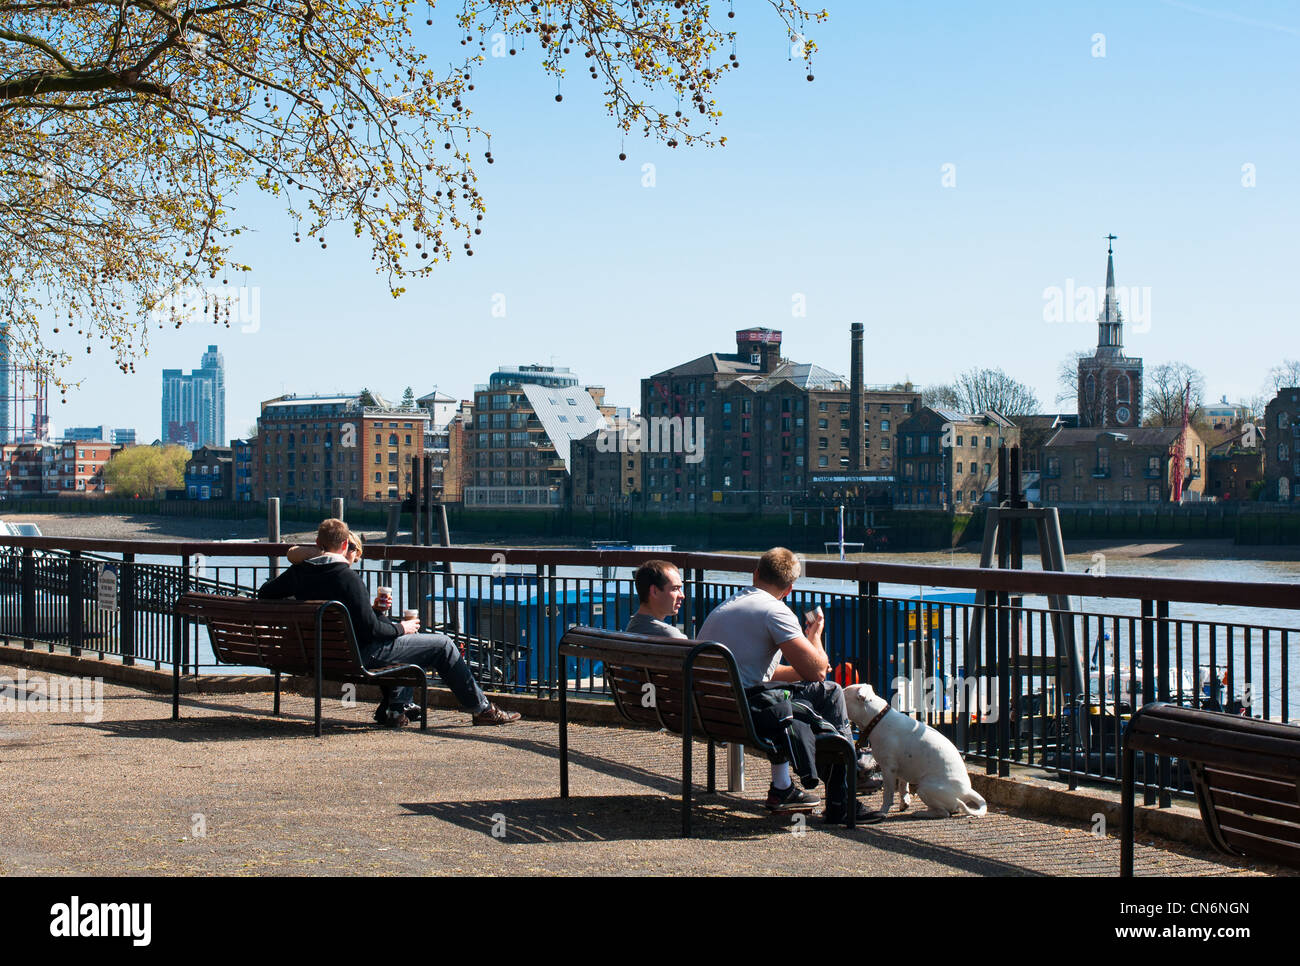 View across the river Thames to Rotherhithe, London, England. Stock Photo